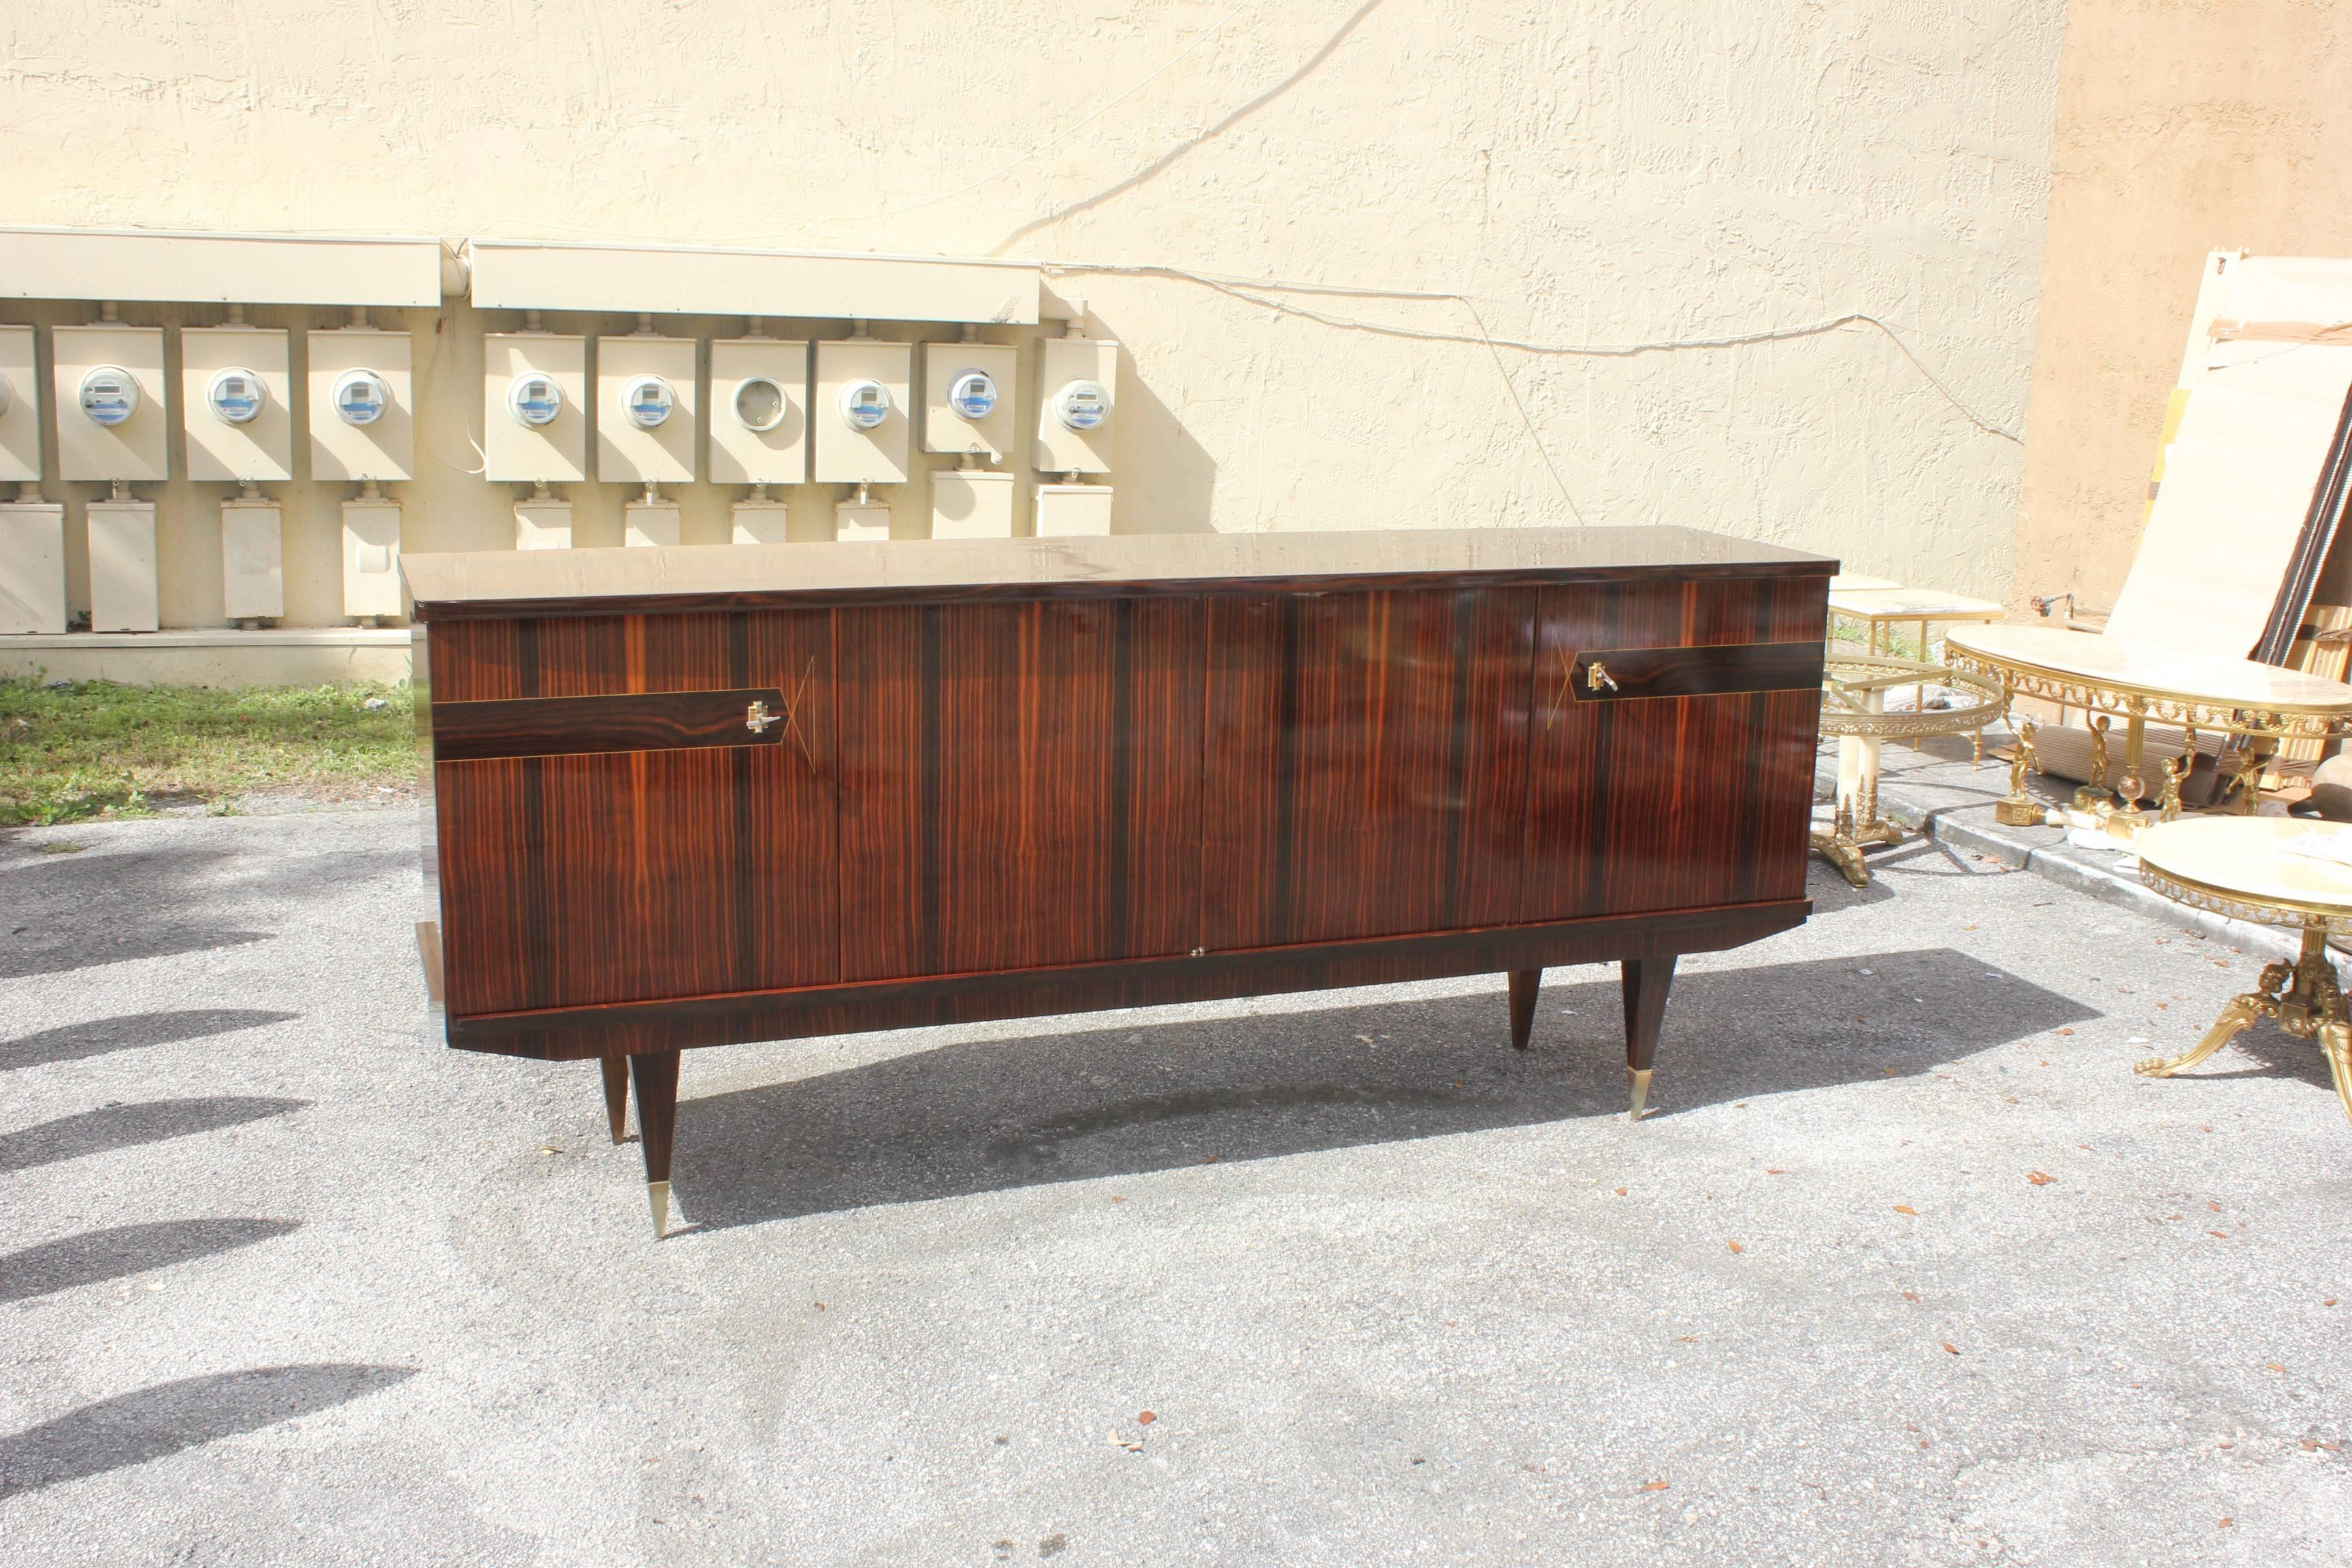 French Art Deco exotic Macassar ebony sideboard or buffet the piece have four doors with beautiful inlay in perfect condition, circa 1940s. Please note these buffets can be taken apart to accommodate elevator needs if necessary. We traveled to buy